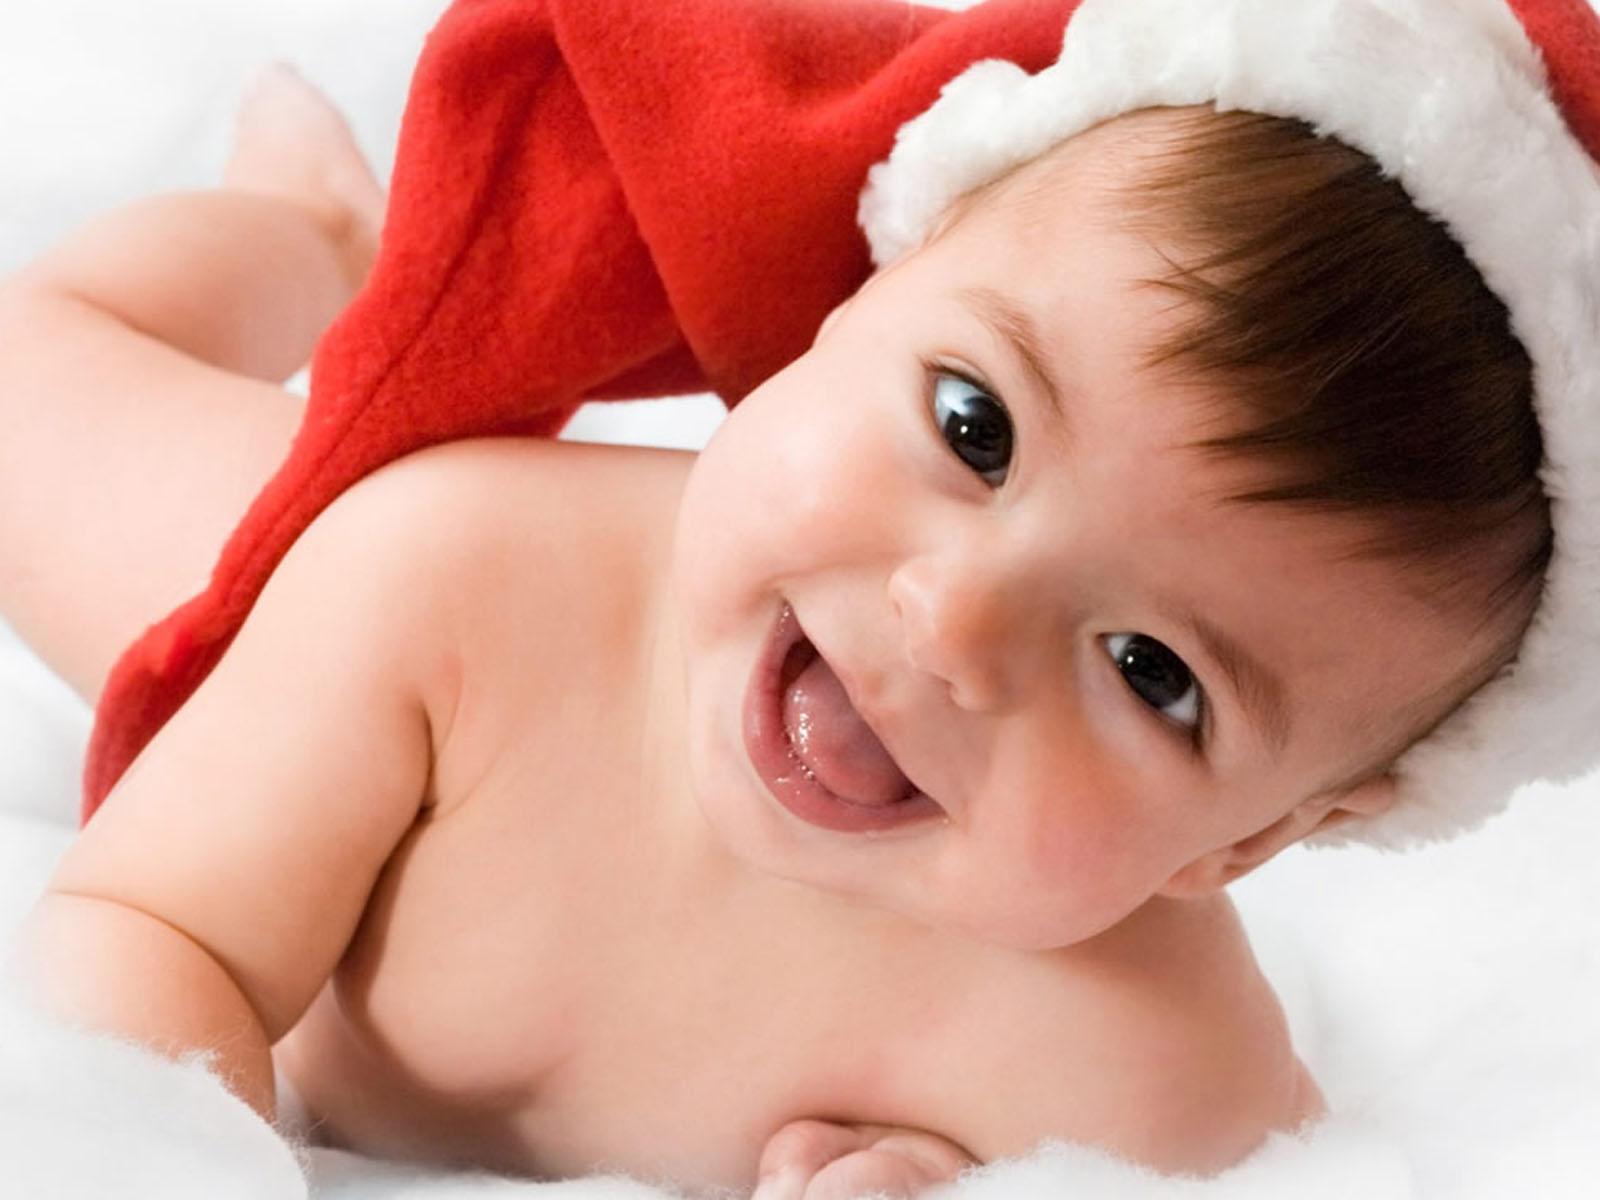 wallpapers Cute Babies Smiling Wallpapers 1600x1200